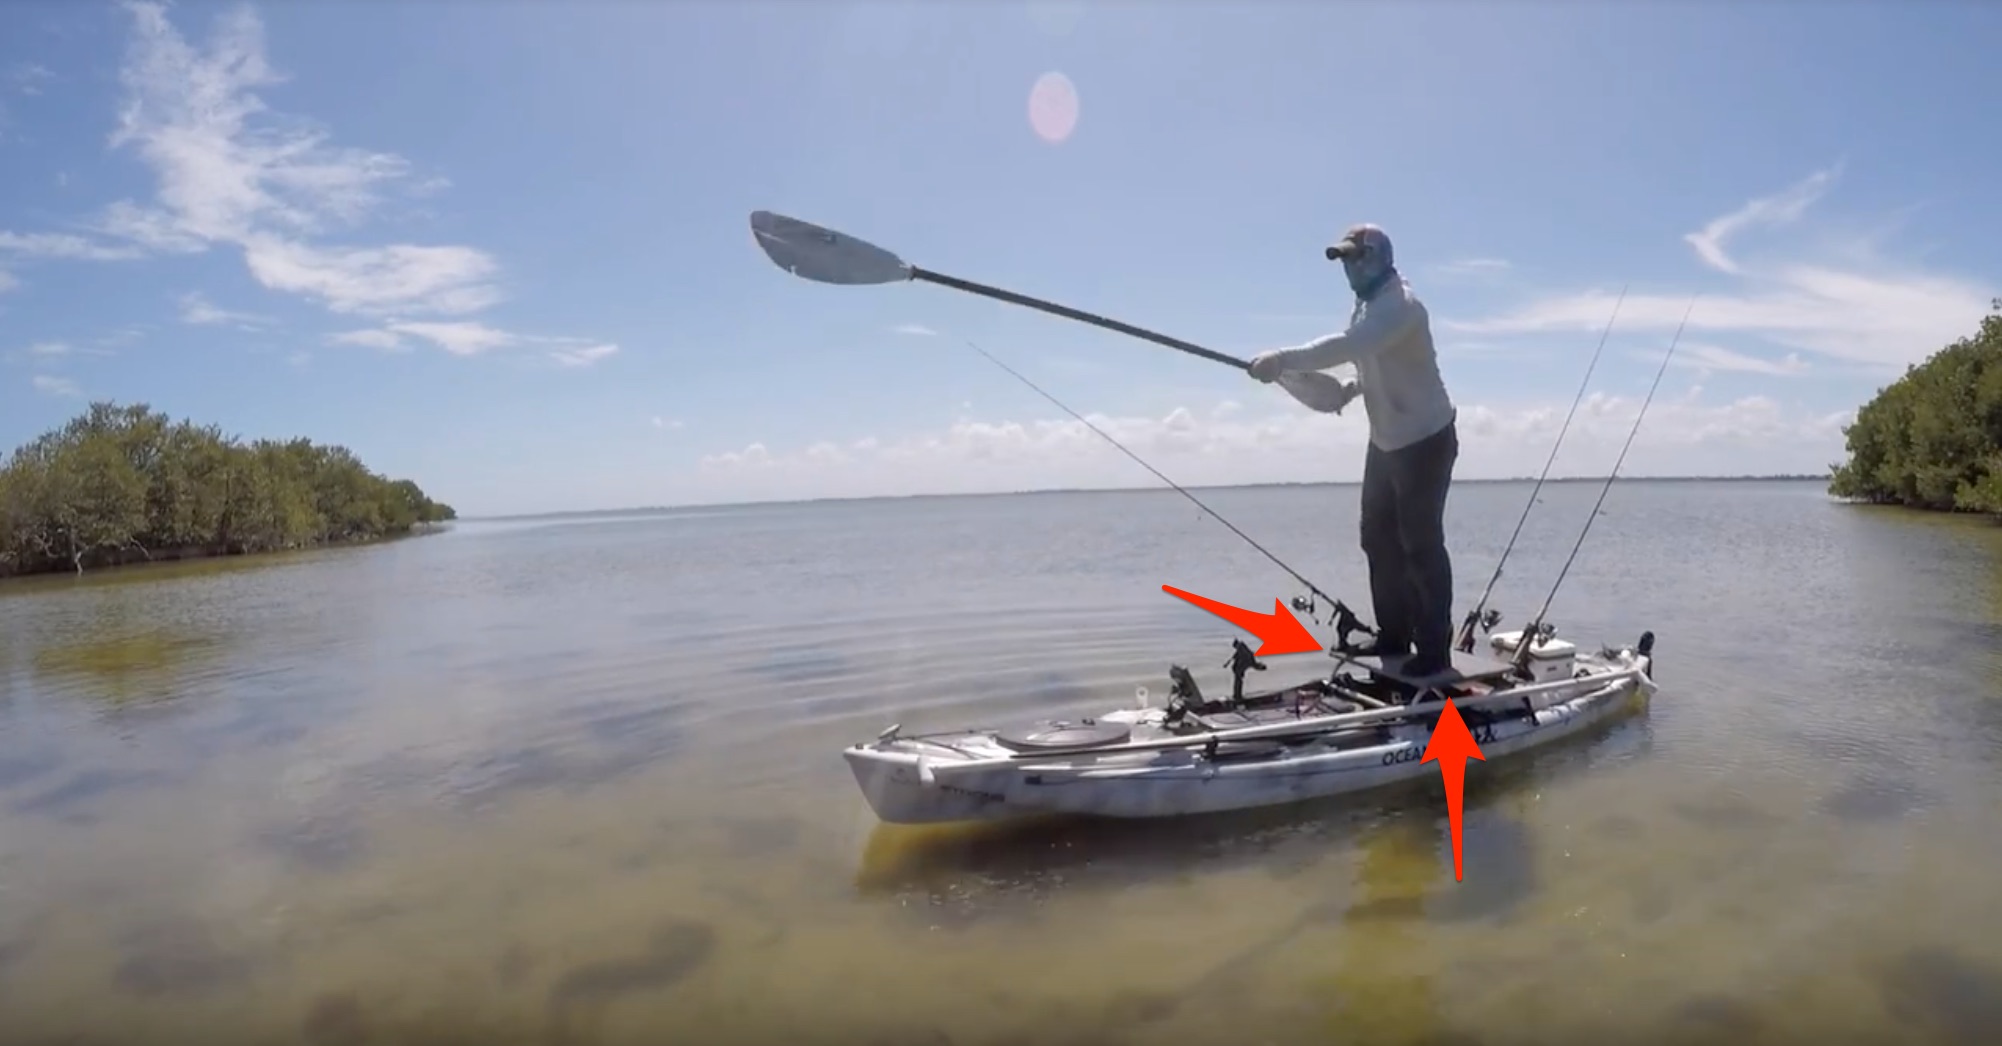 How To Make A Standing Platform For Your Kayak (So You Can See